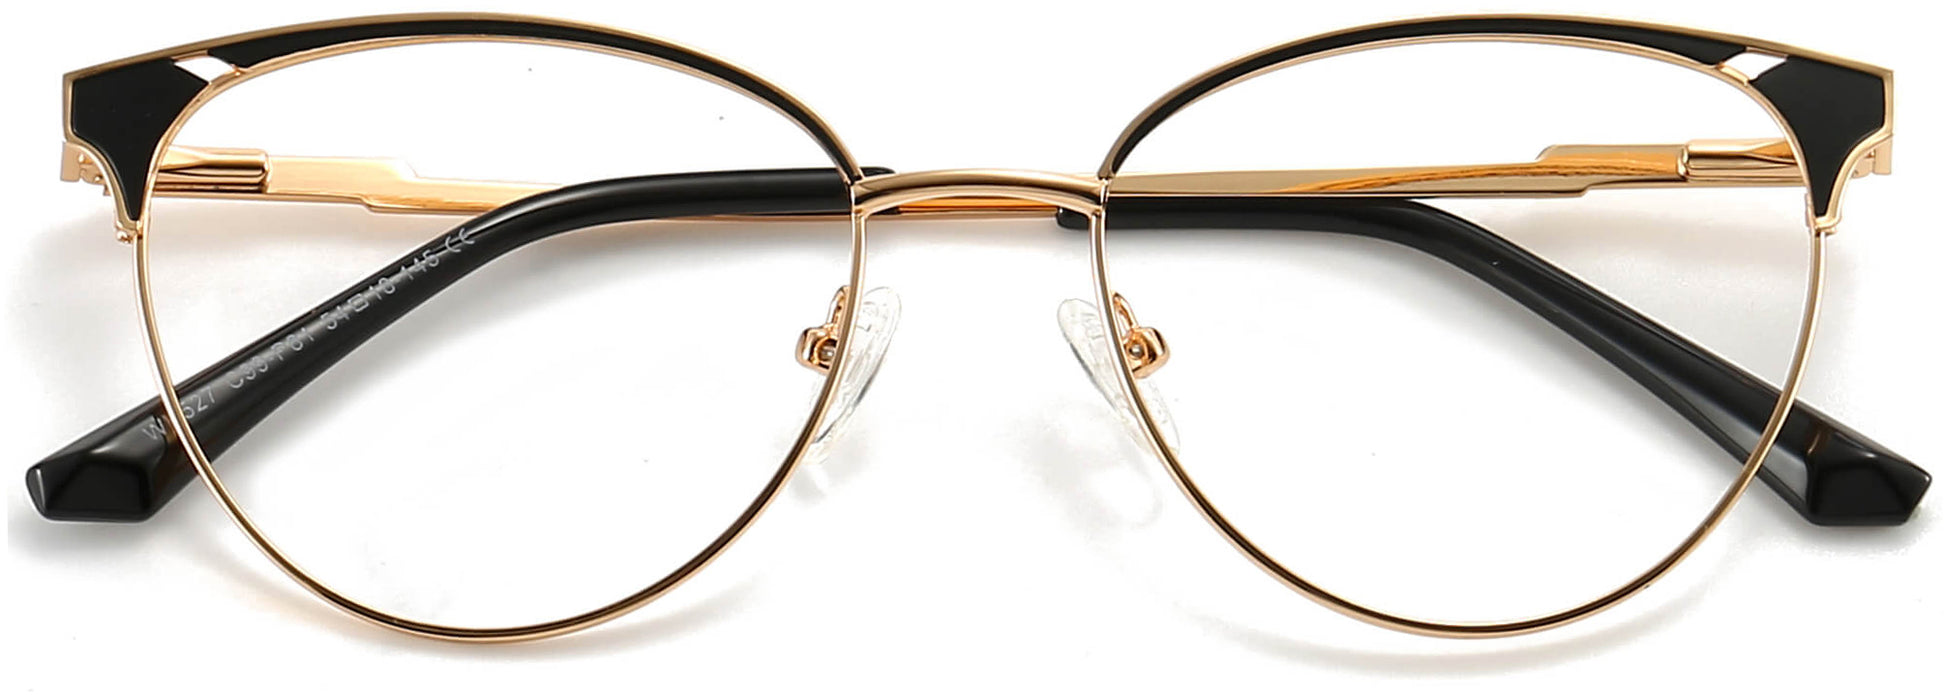 Cici Cateye Black Eyeglasses from ANRRI, closed view